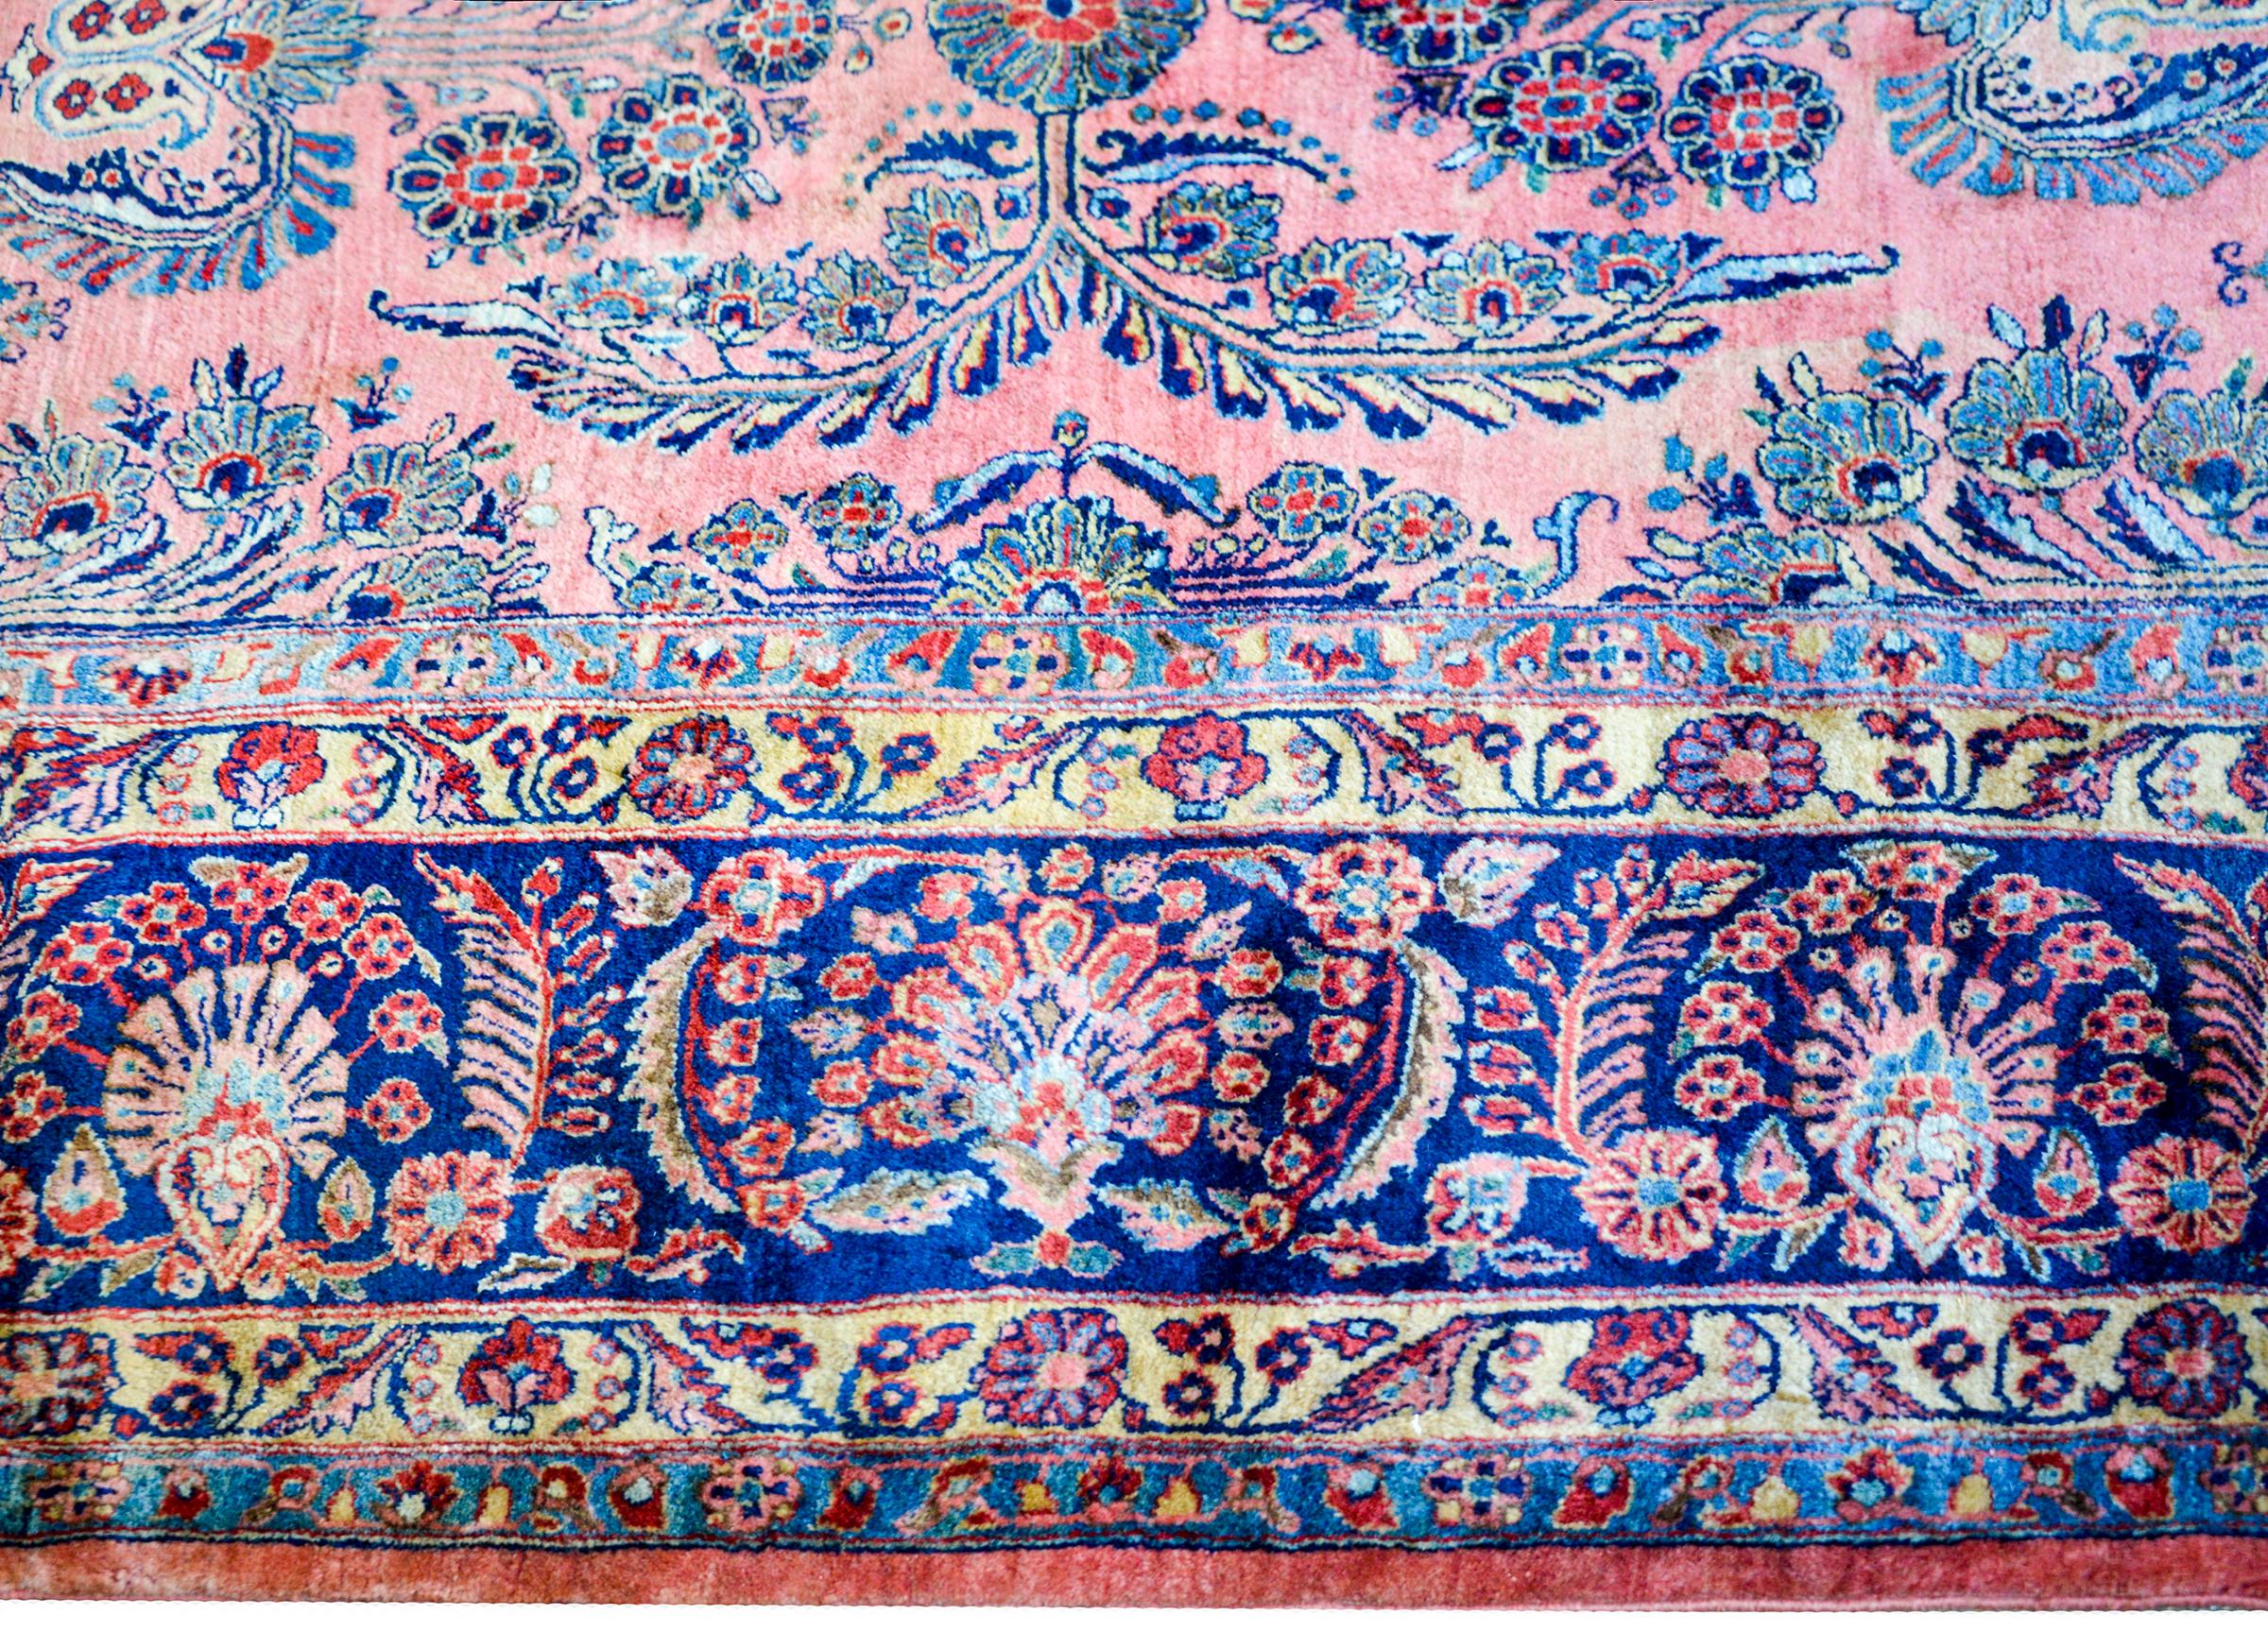 Vegetable Dyed Incredible Early 20th Century Sarouk Rug